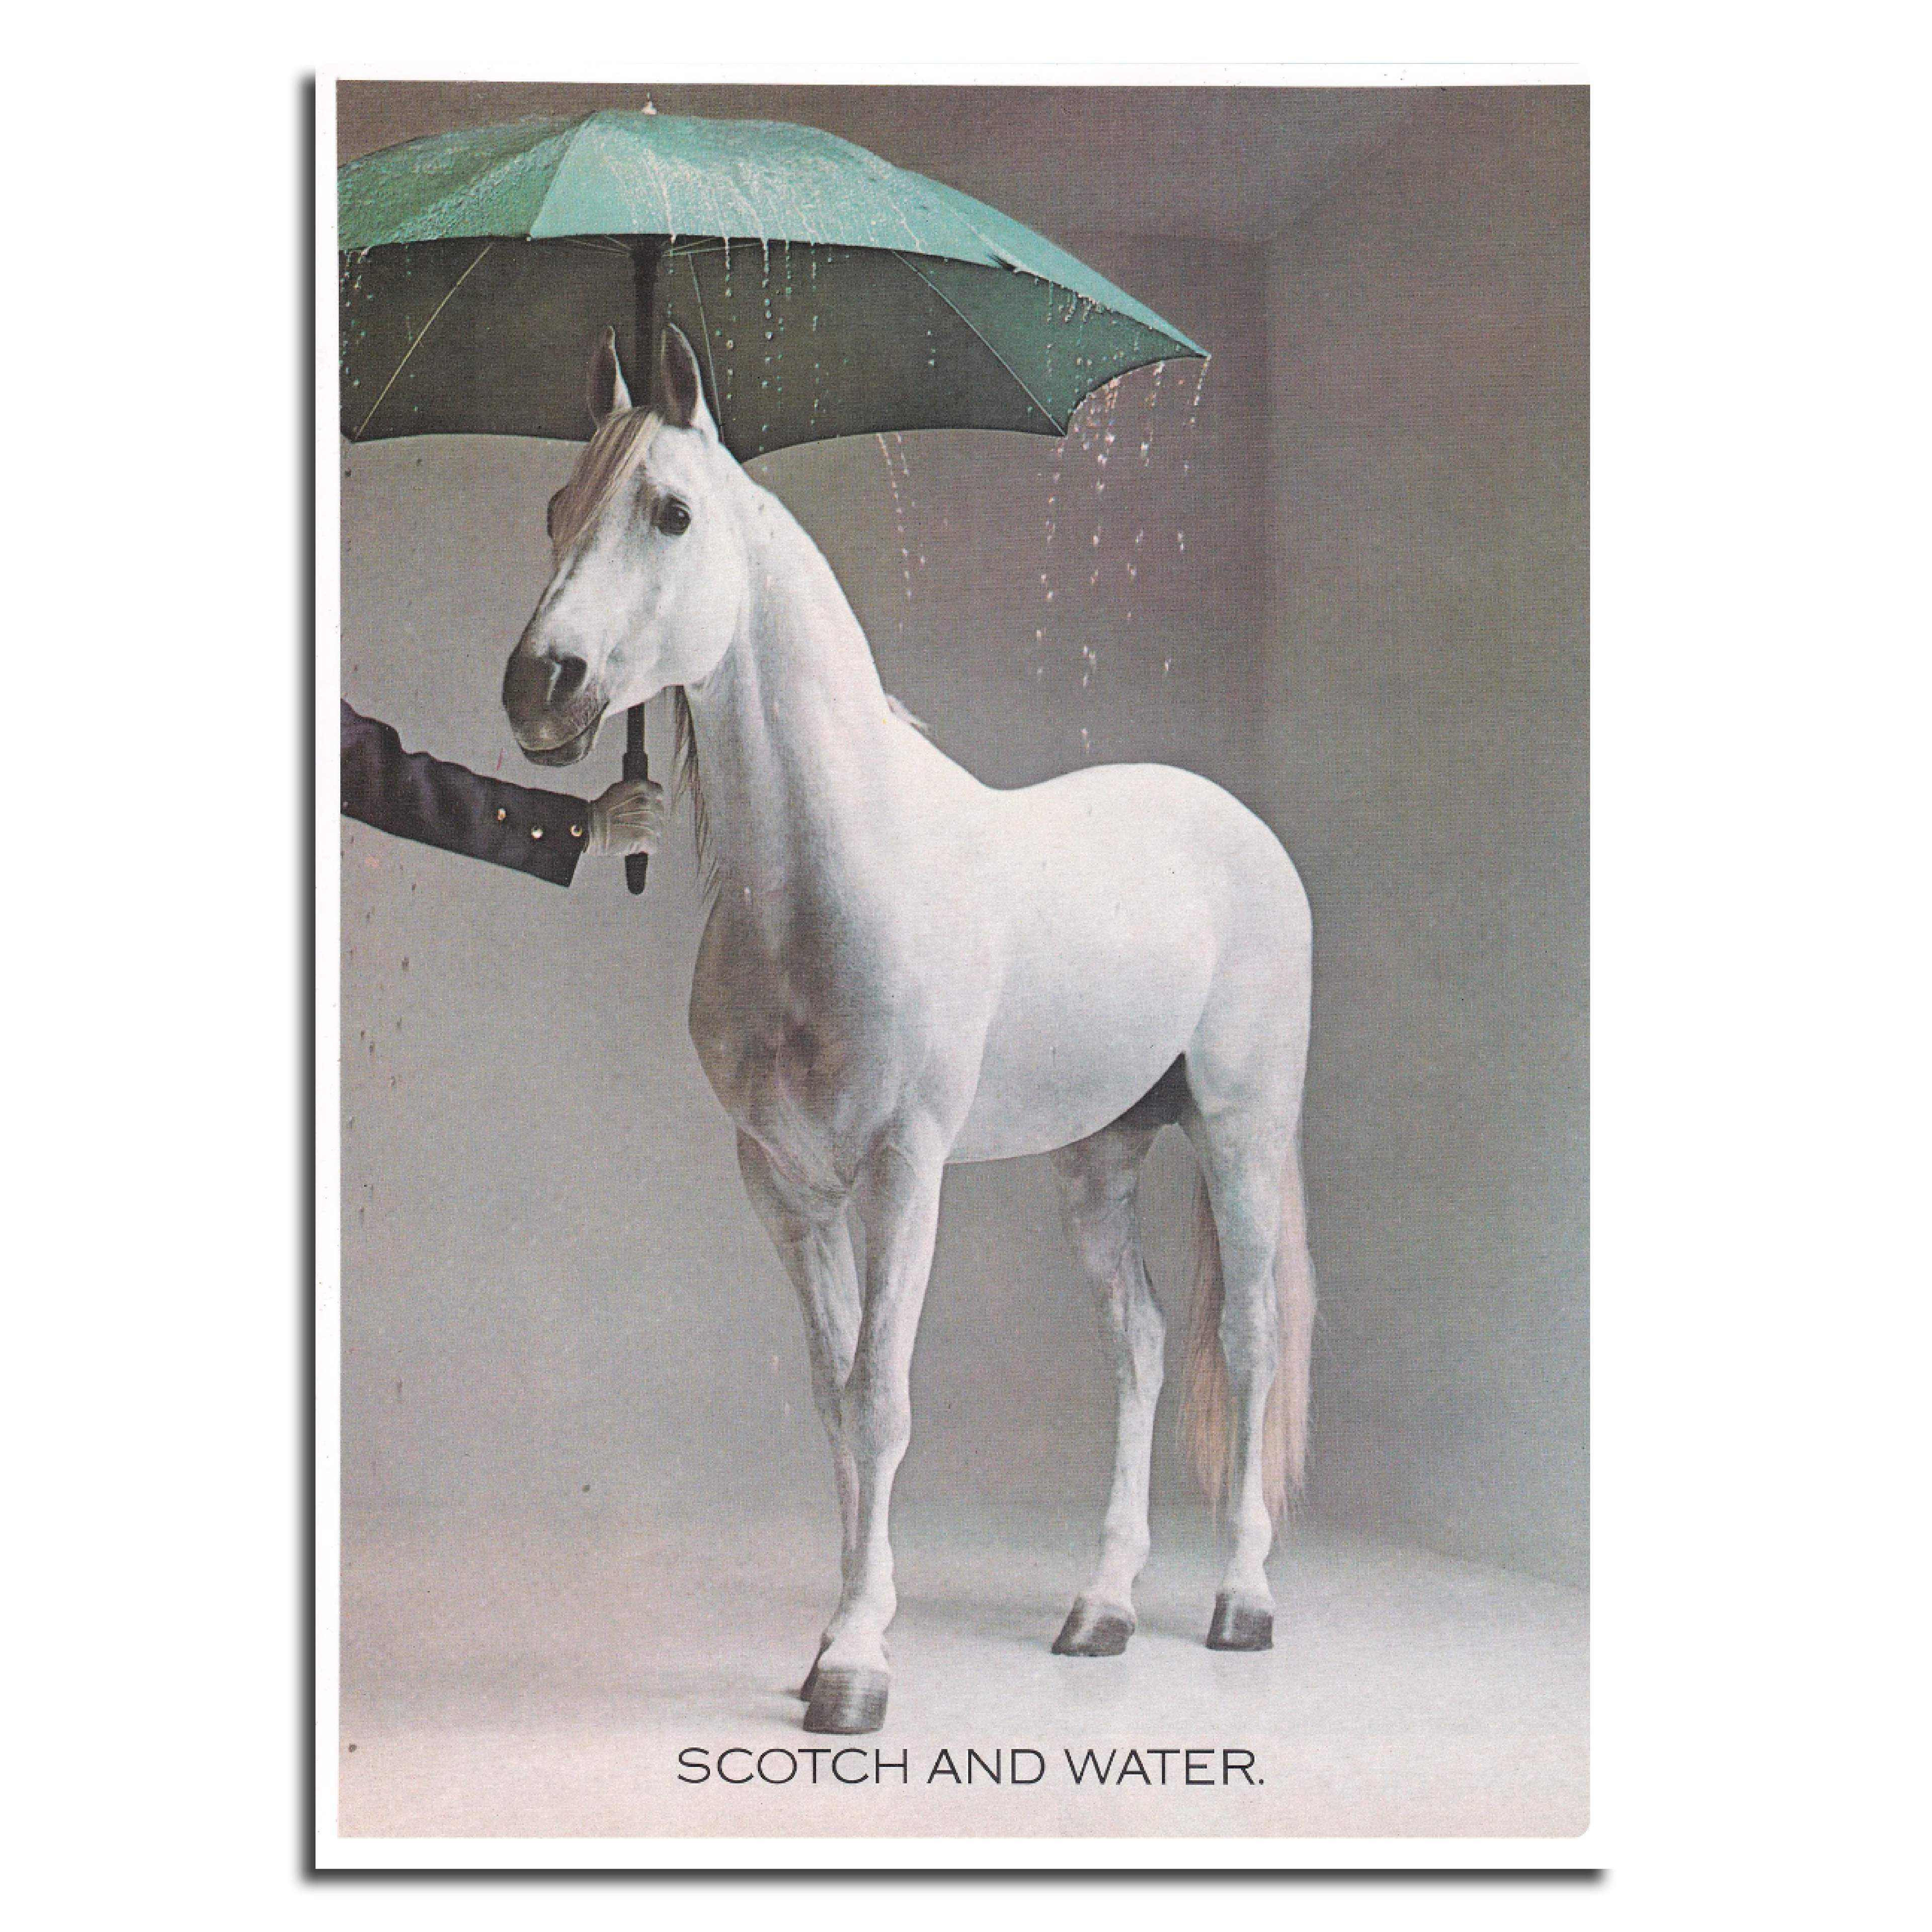 Photo of a white horse underneath an umbrella sheltering from the rain. Award-winning White Horse Whisky press ad.